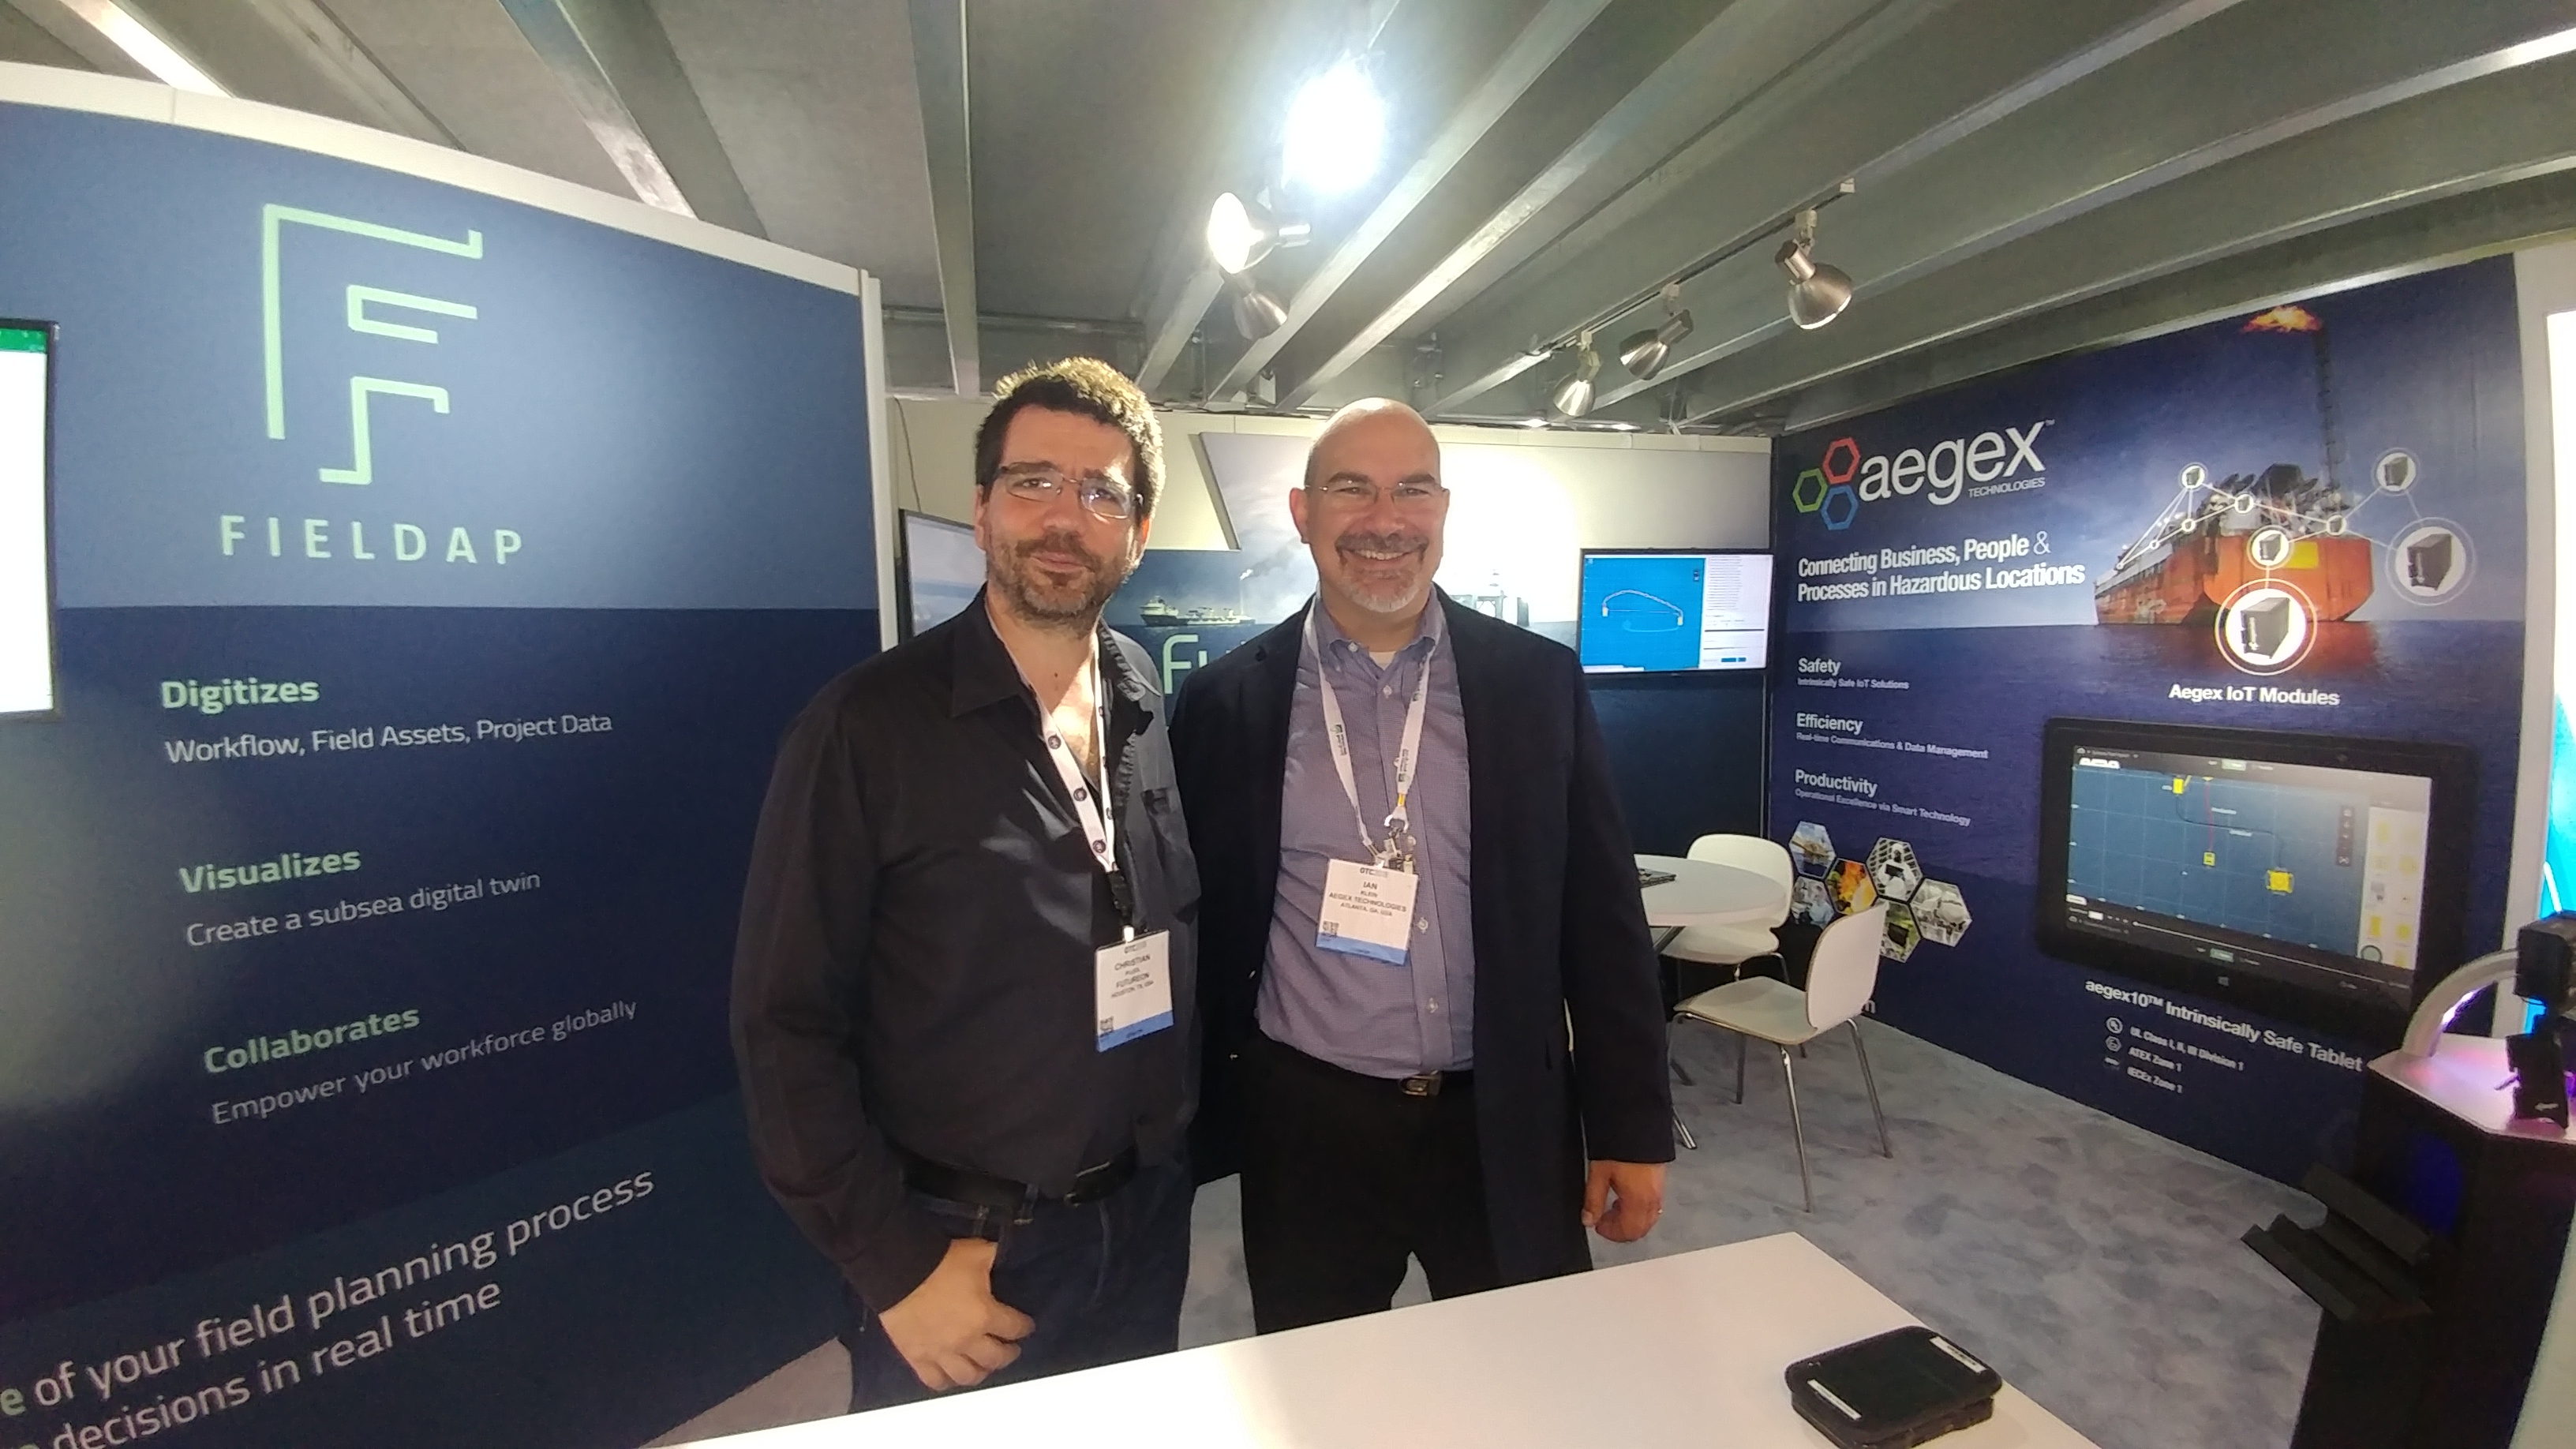 Key Takeaways from Aegex’s Exhibition at OTC 2018